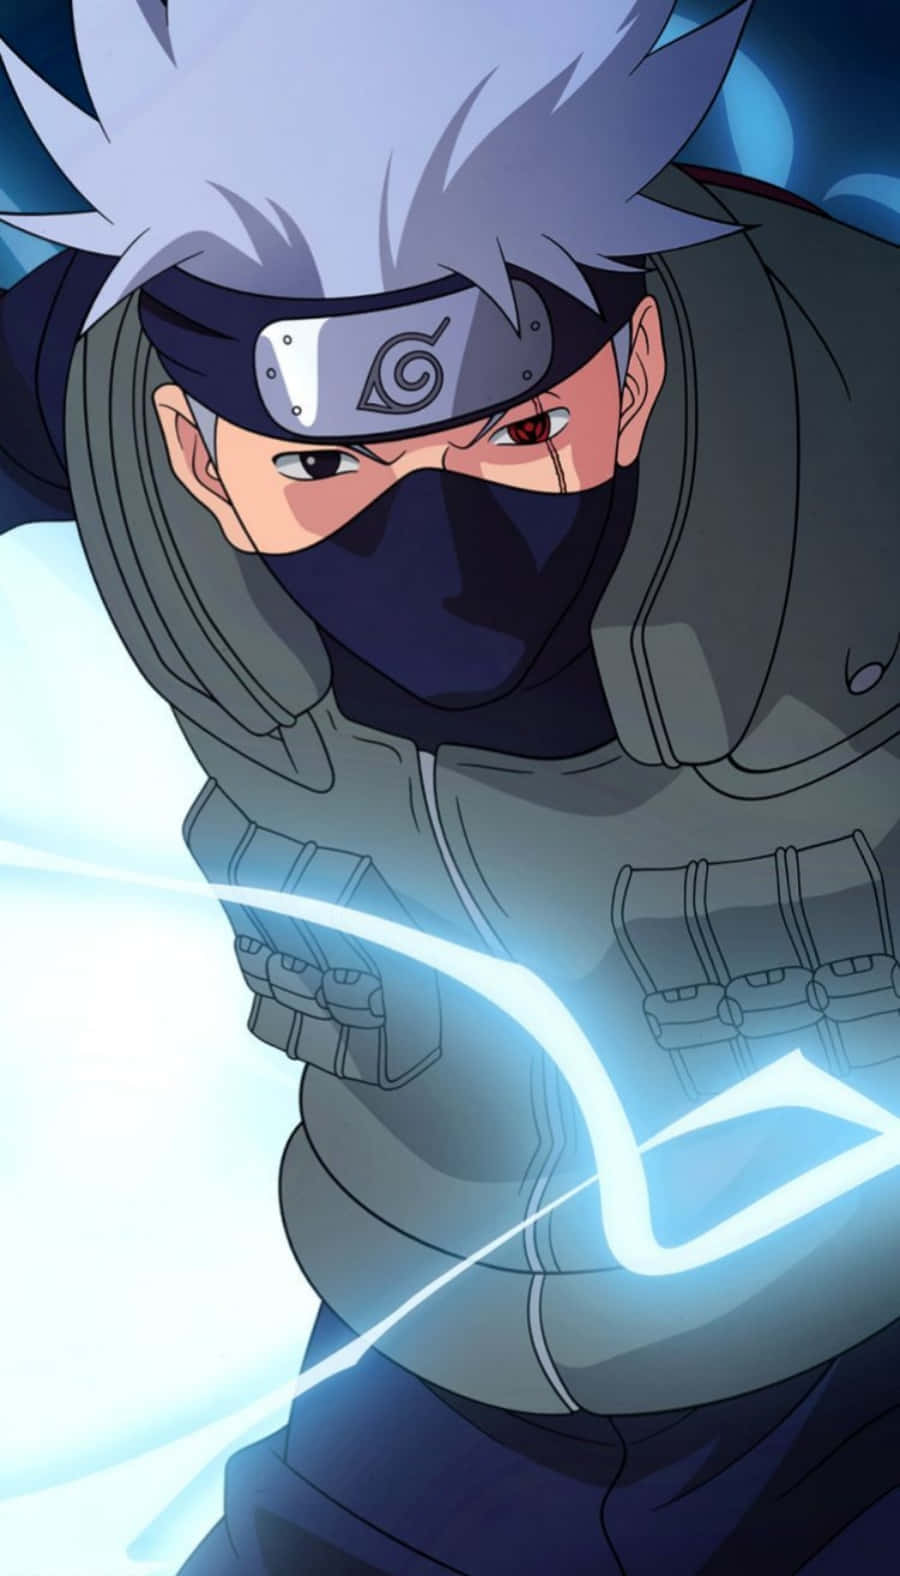 "Ready for action! Cute Kakashi is prepared for any situation." Wallpaper